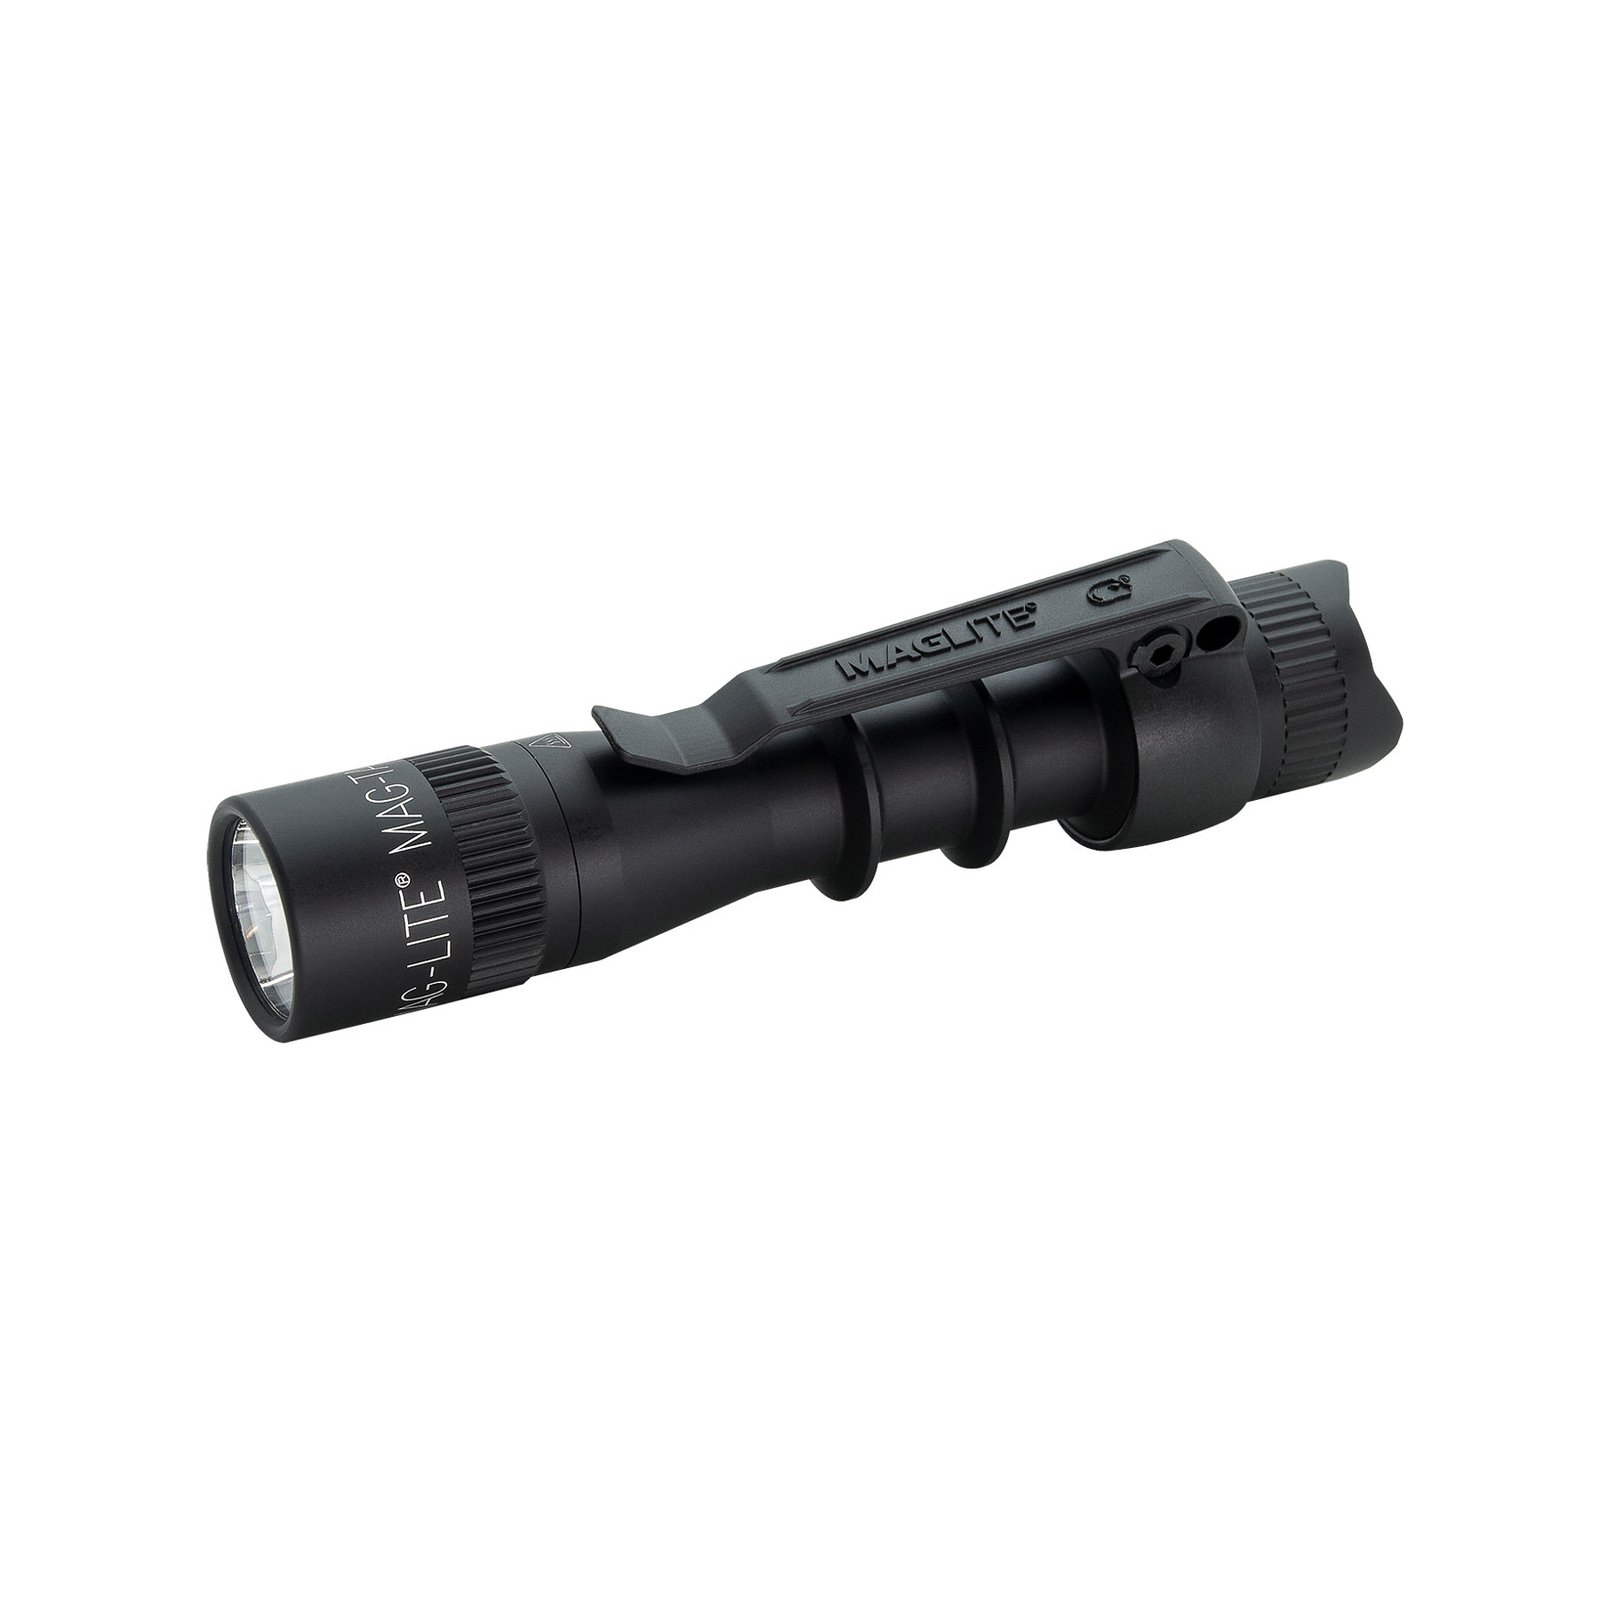 Maglite LED torch Mag-Tac II, 2-Cell CR123, black